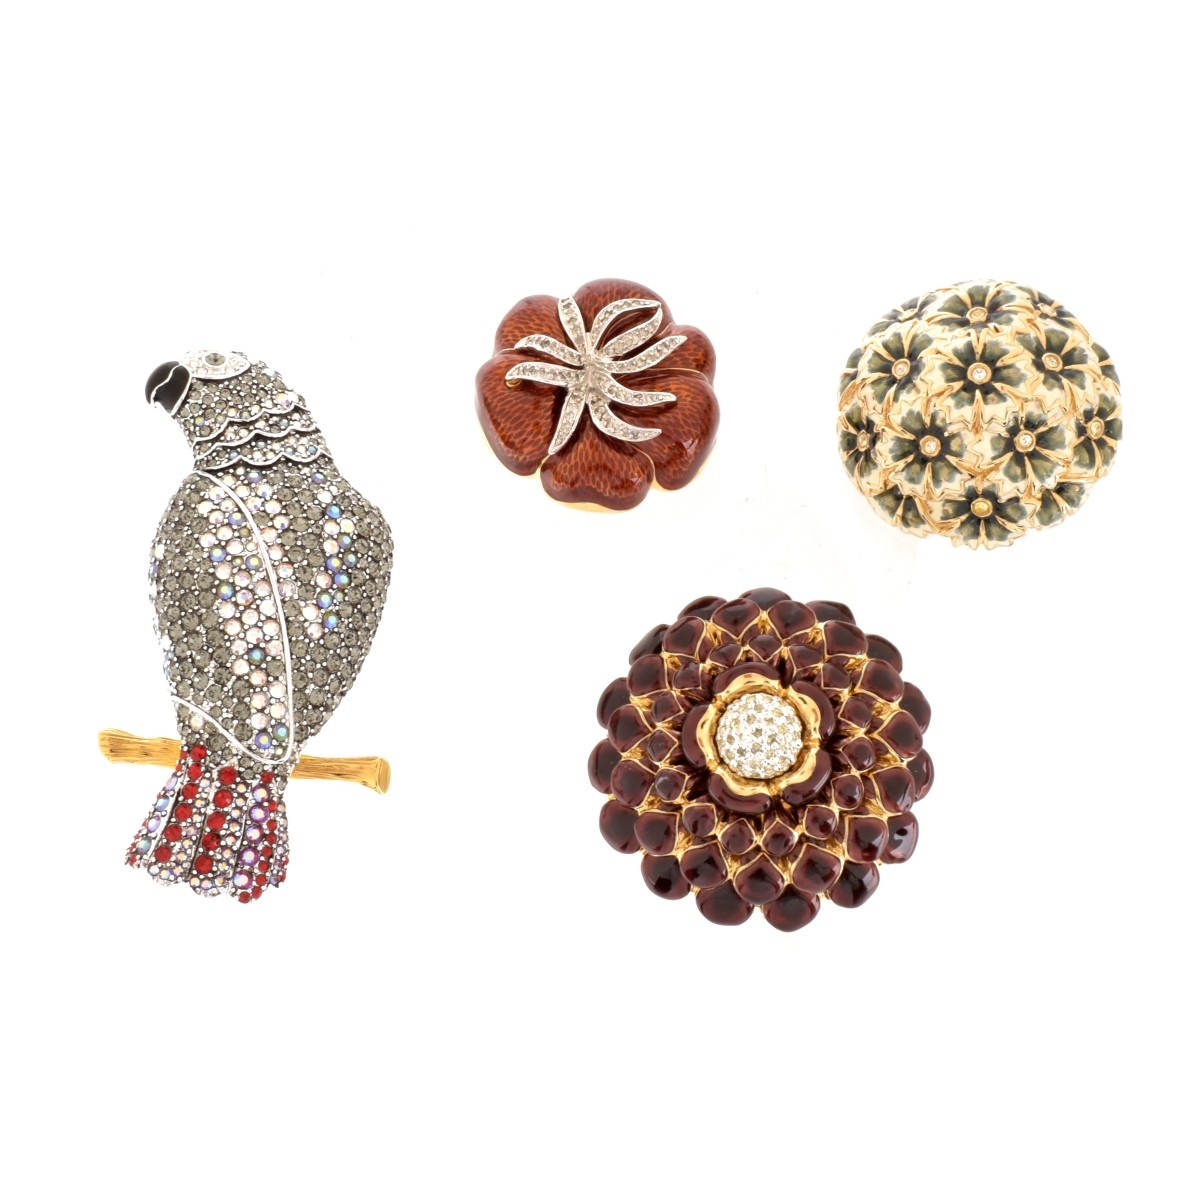 Judith Leiber and Joan Rivers Brooches